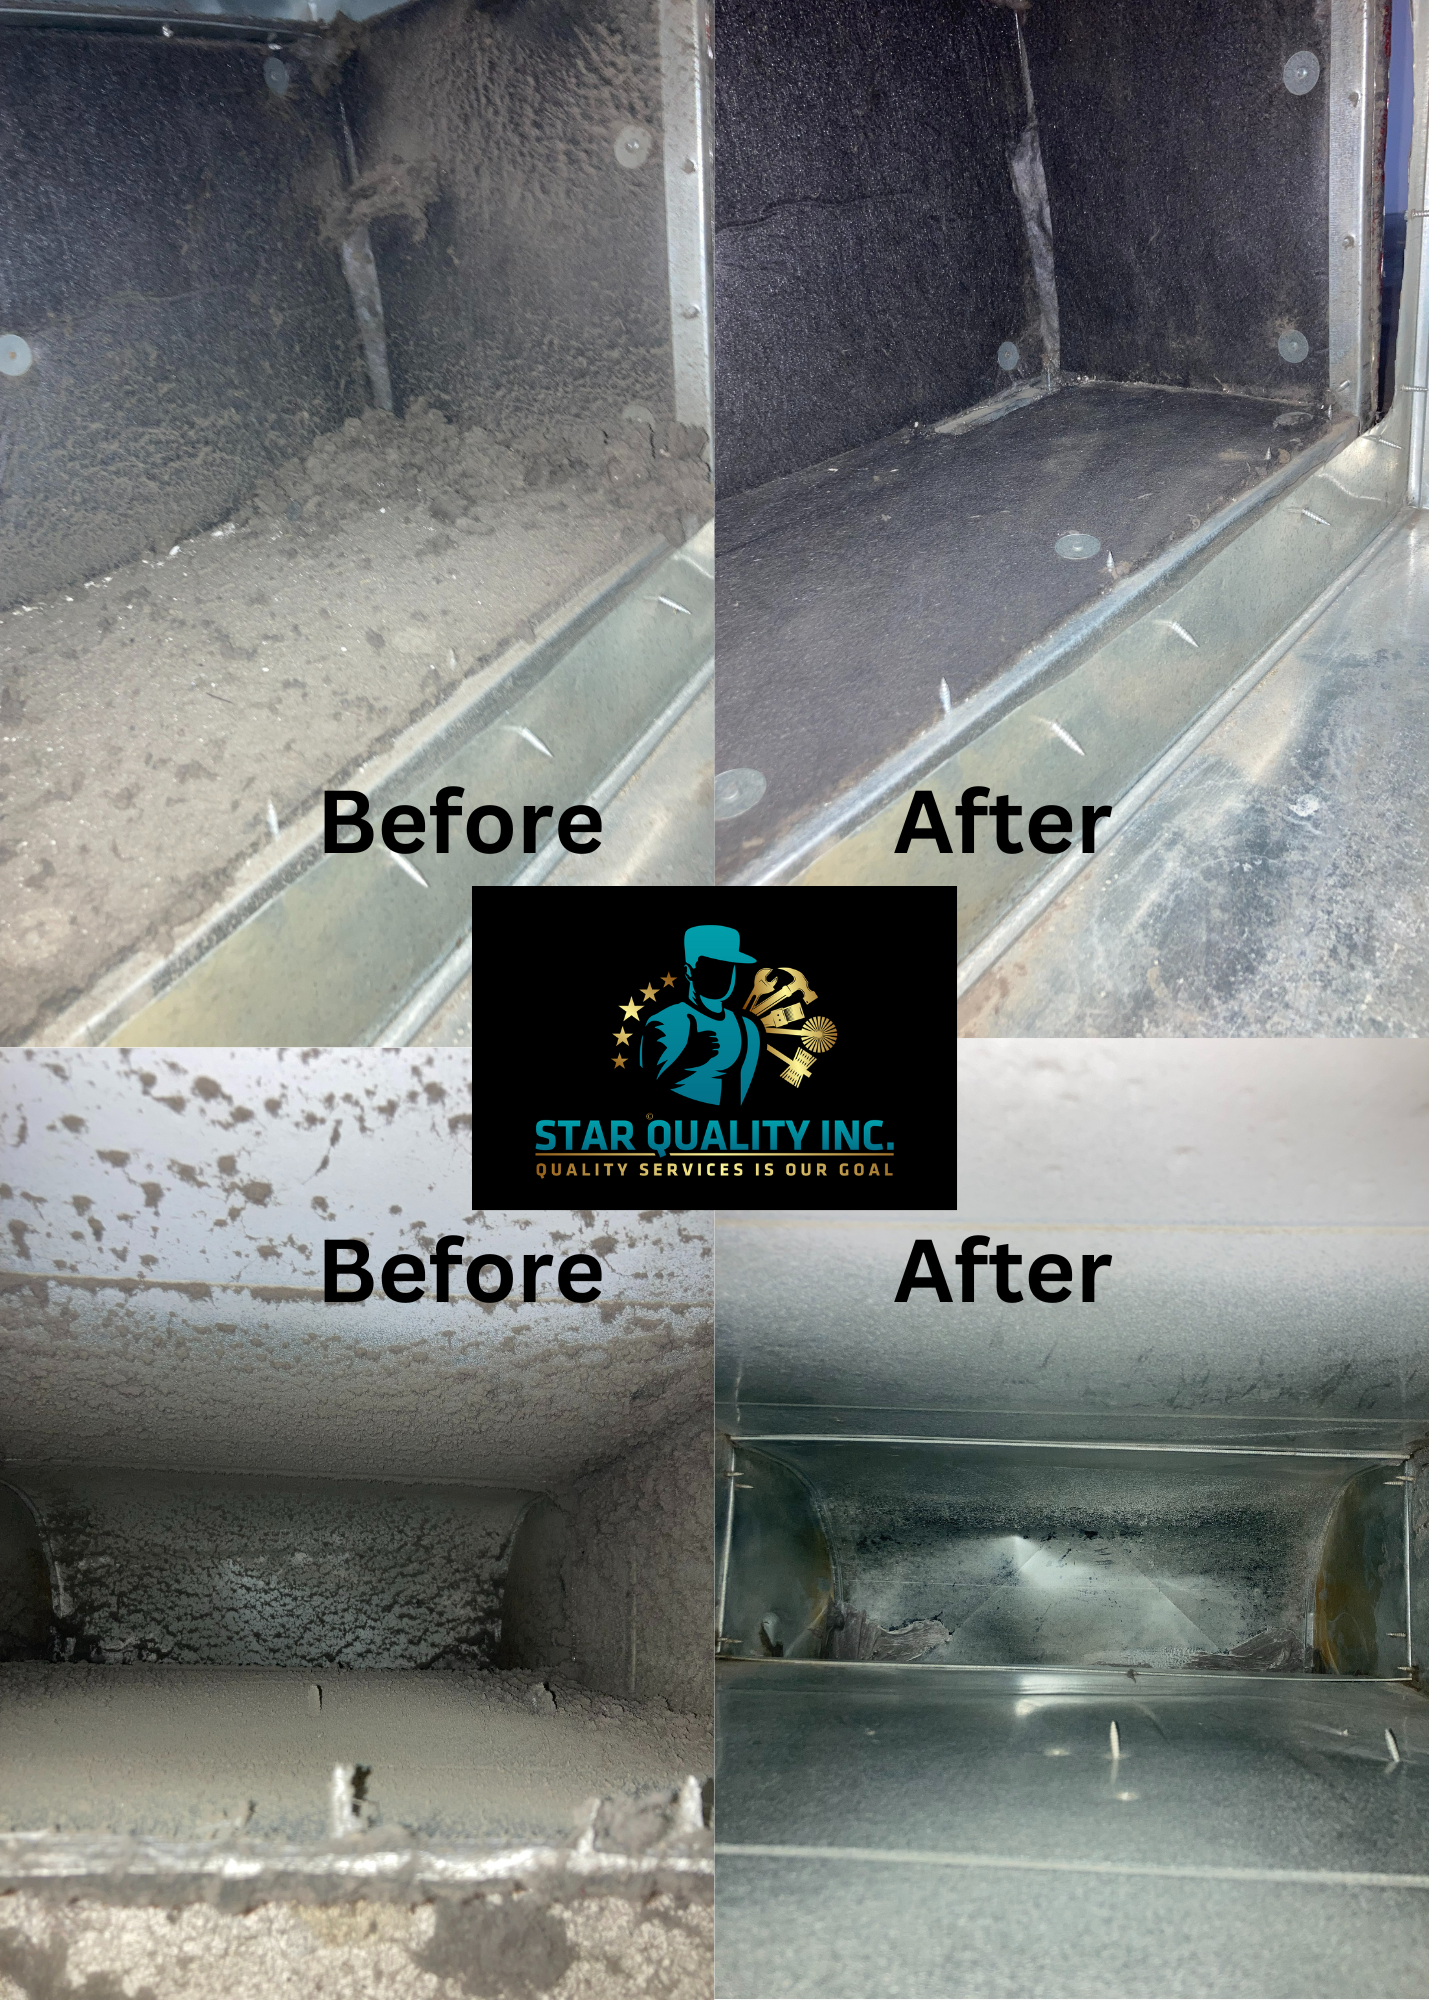 Mold Removal - Star Quality Duct Cleaning